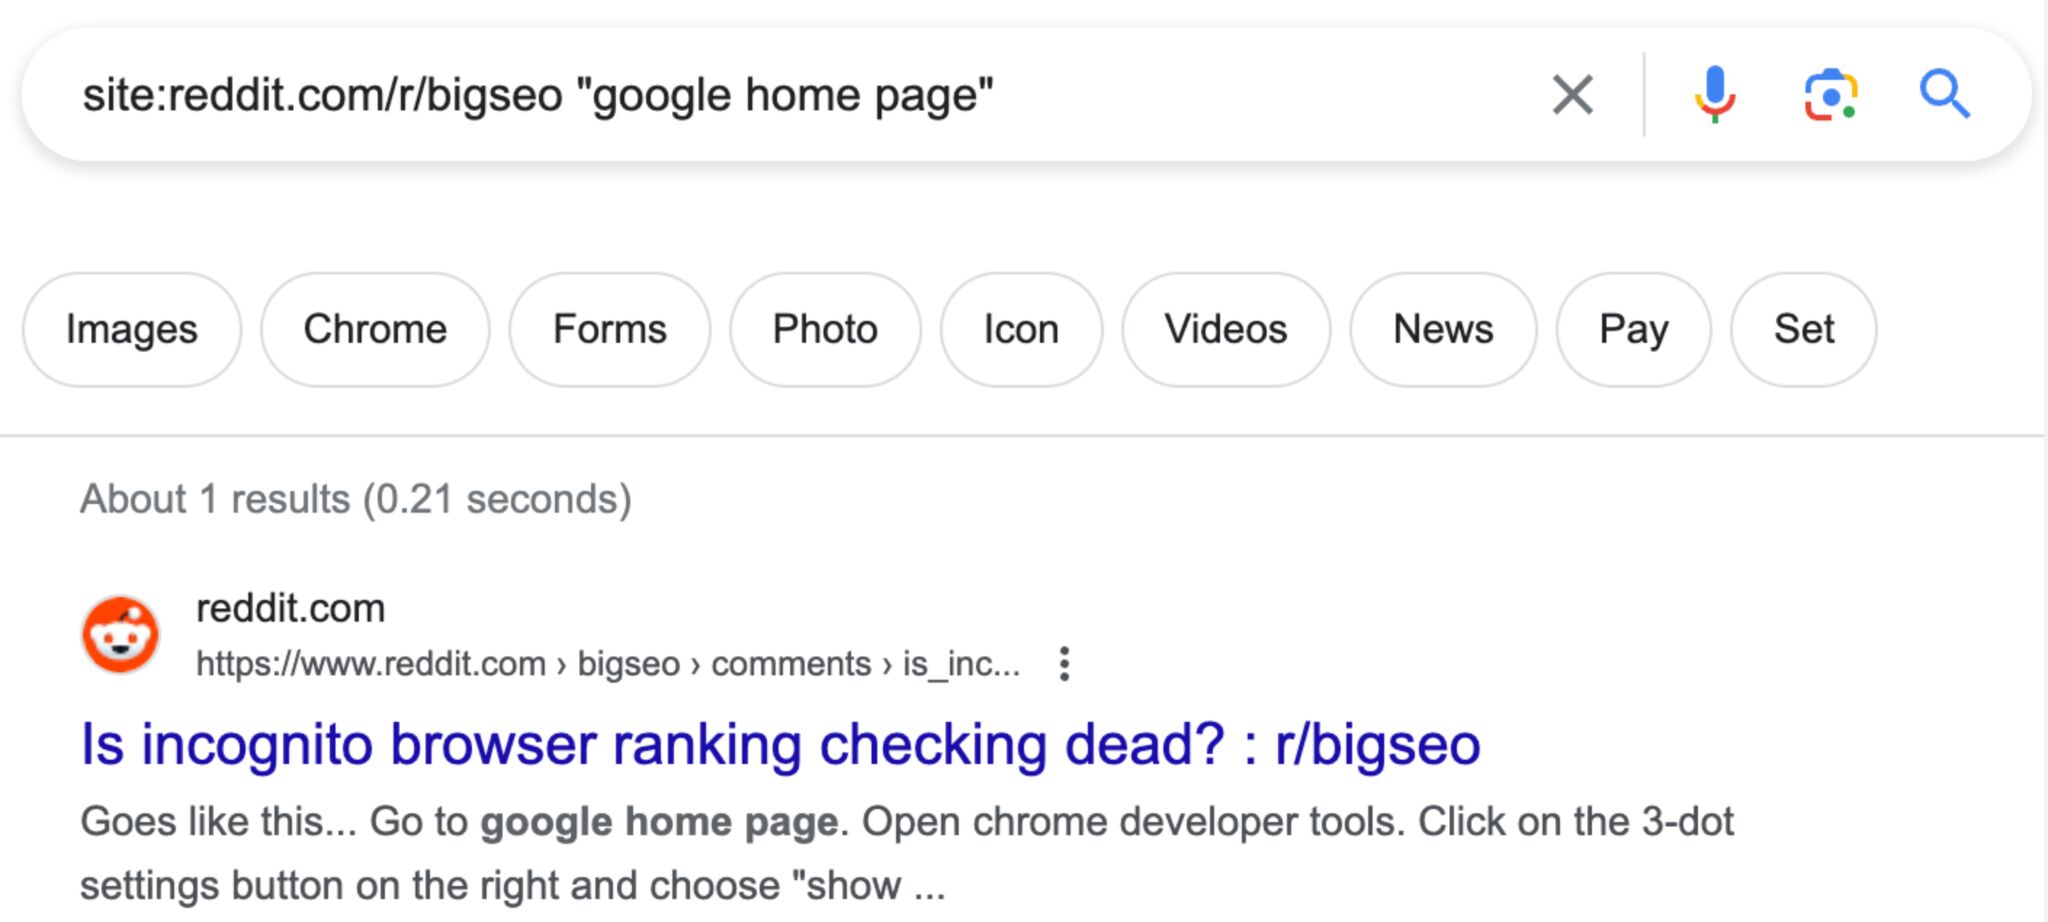 The context for the keyword "google home page"